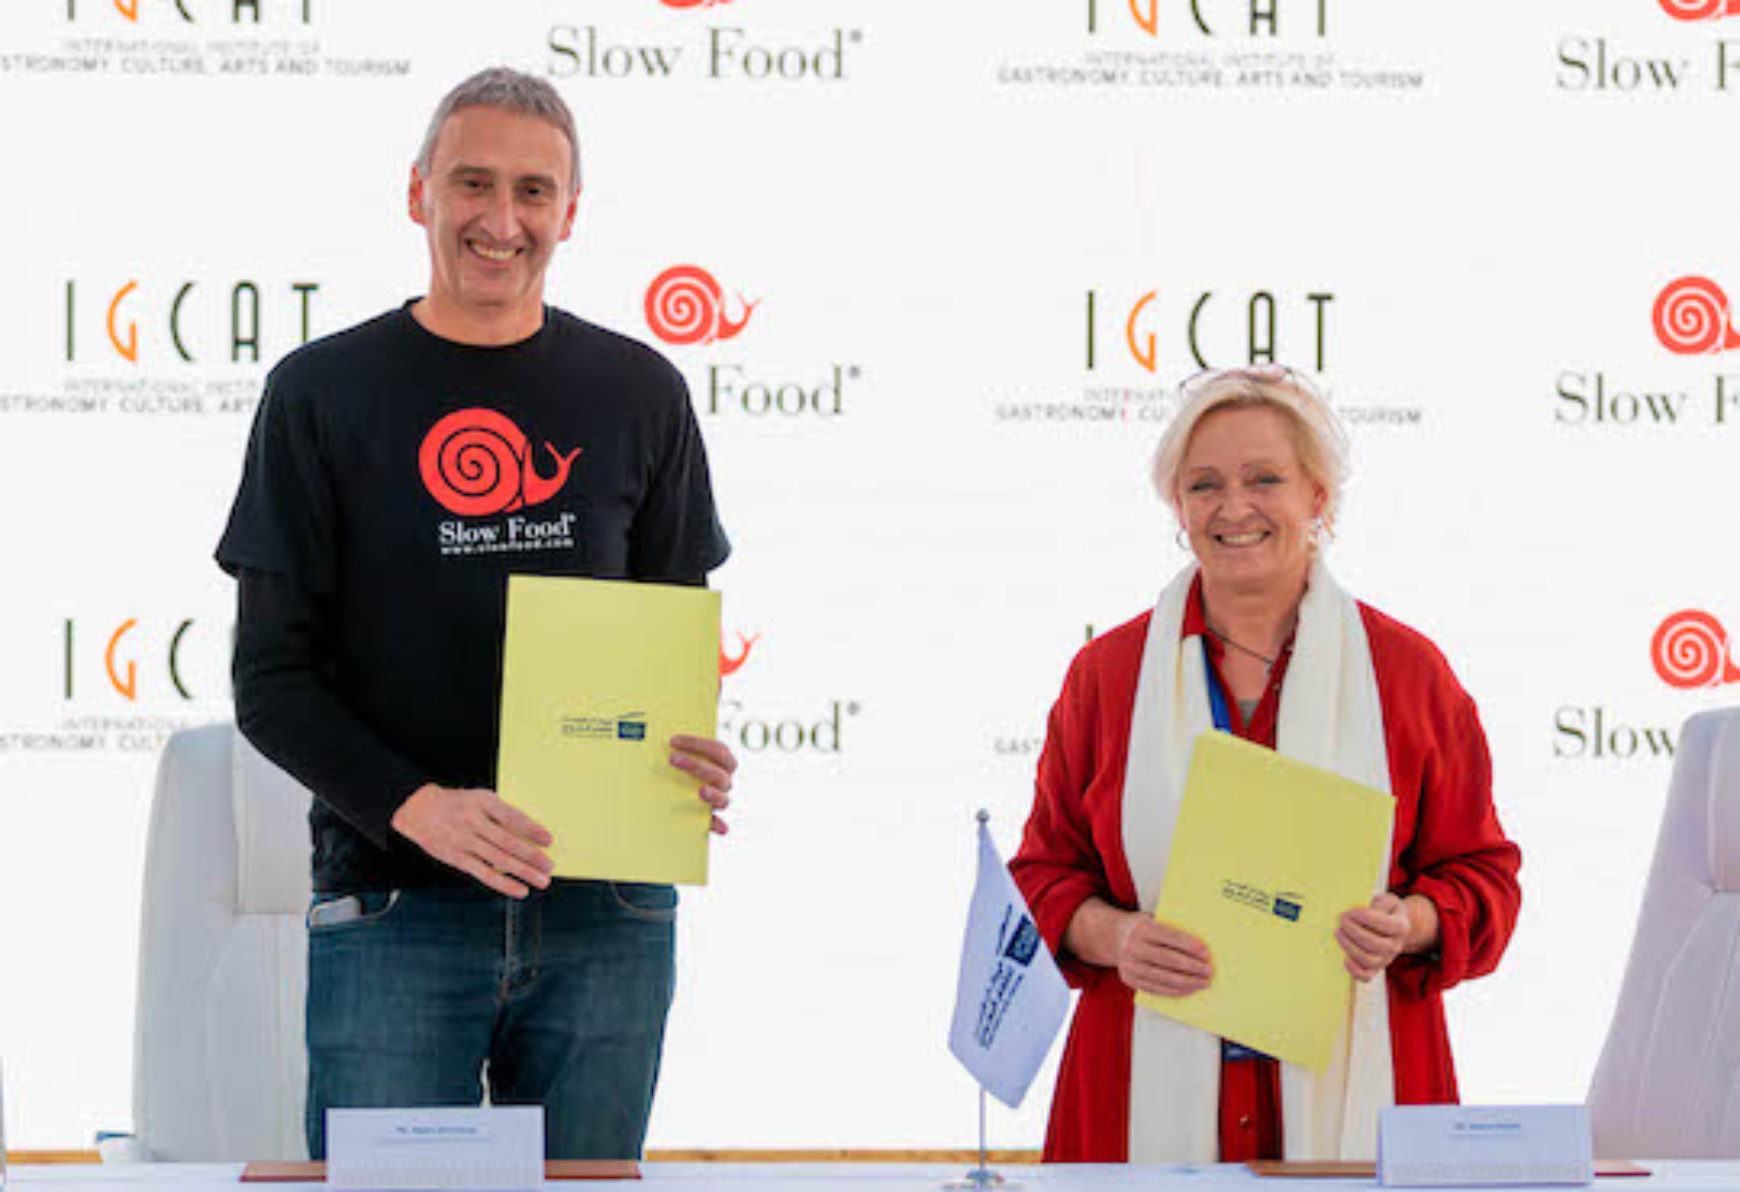 IGCAT and Slow Food join forces to support sustainable food futures